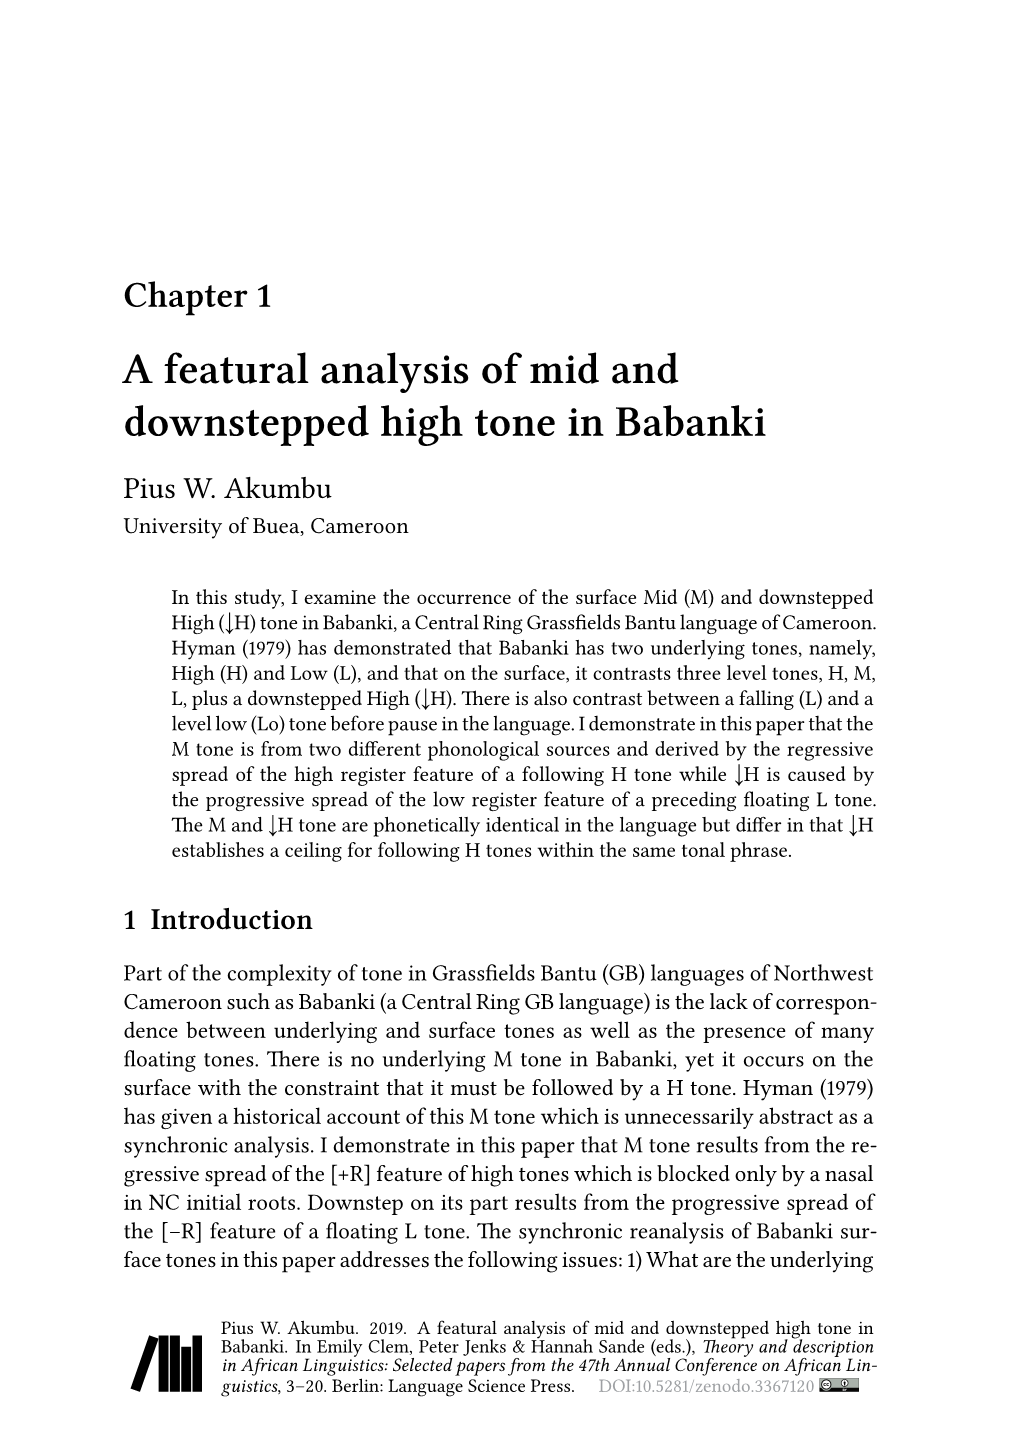 A Featural Analysis of Mid and Downstepped High Tone in Babanki Pius W